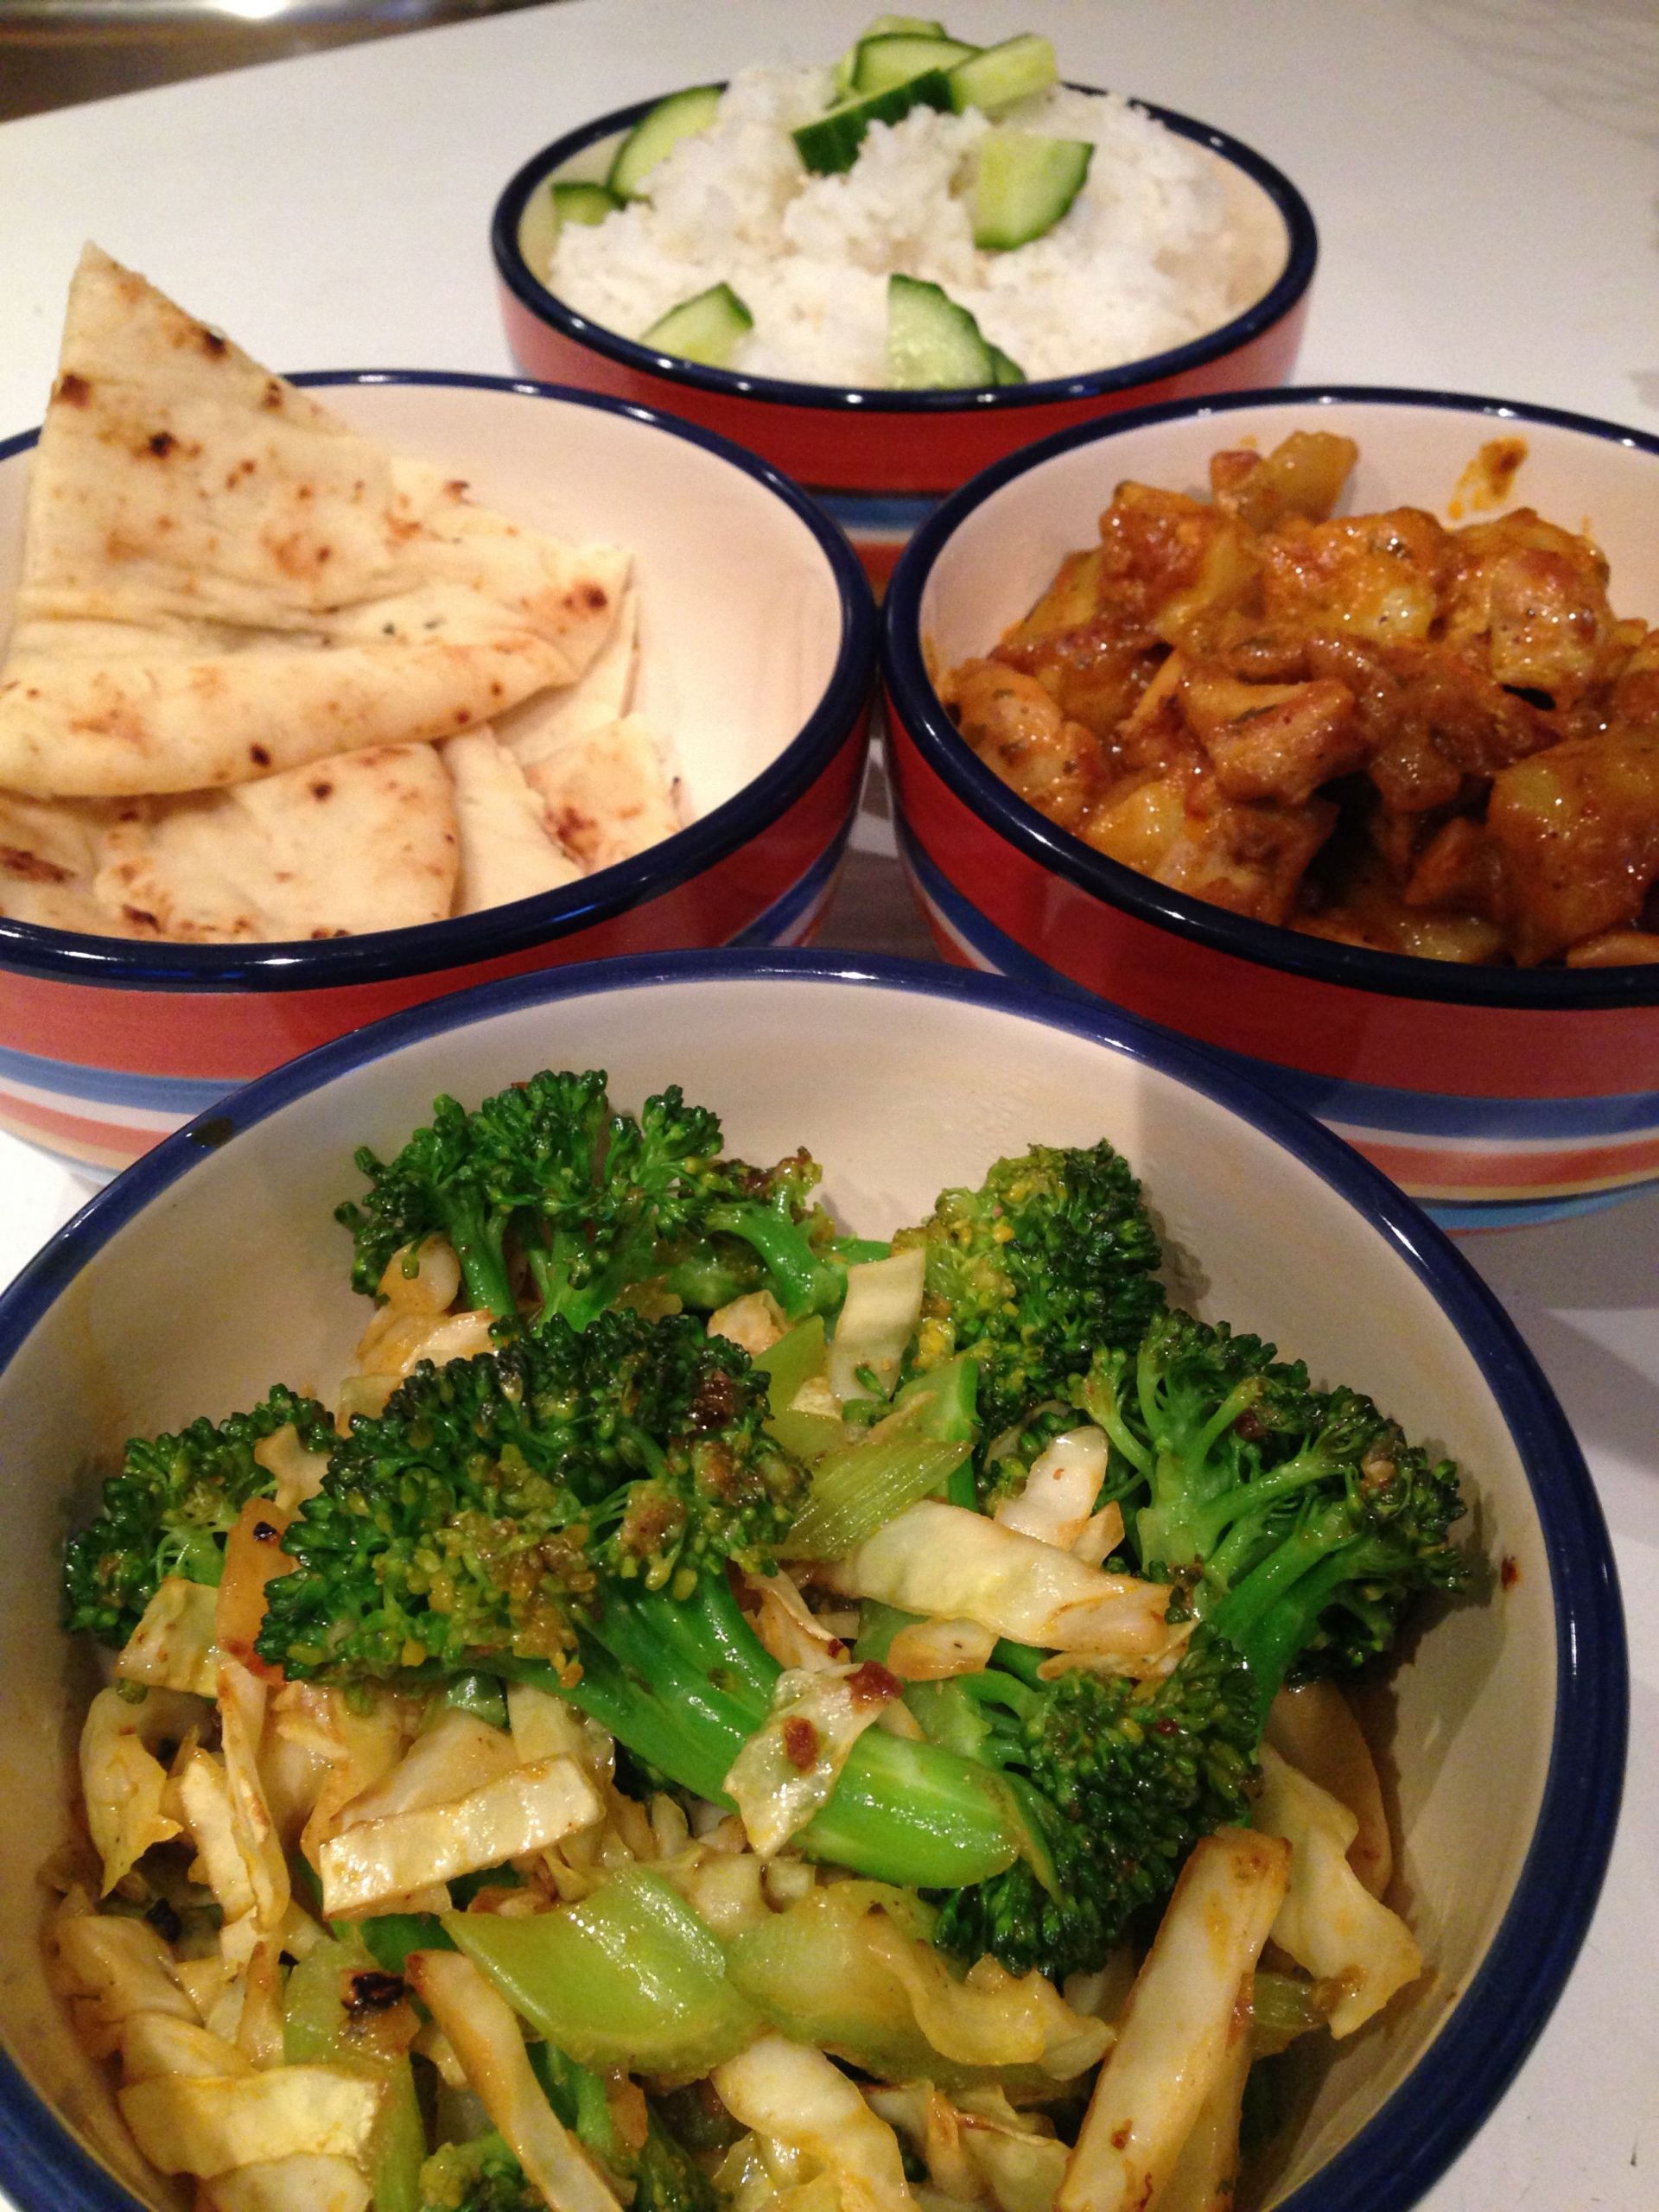 Vegetable Side Dishes For Chicken
 indian ve ables a side dish for butter chicken or